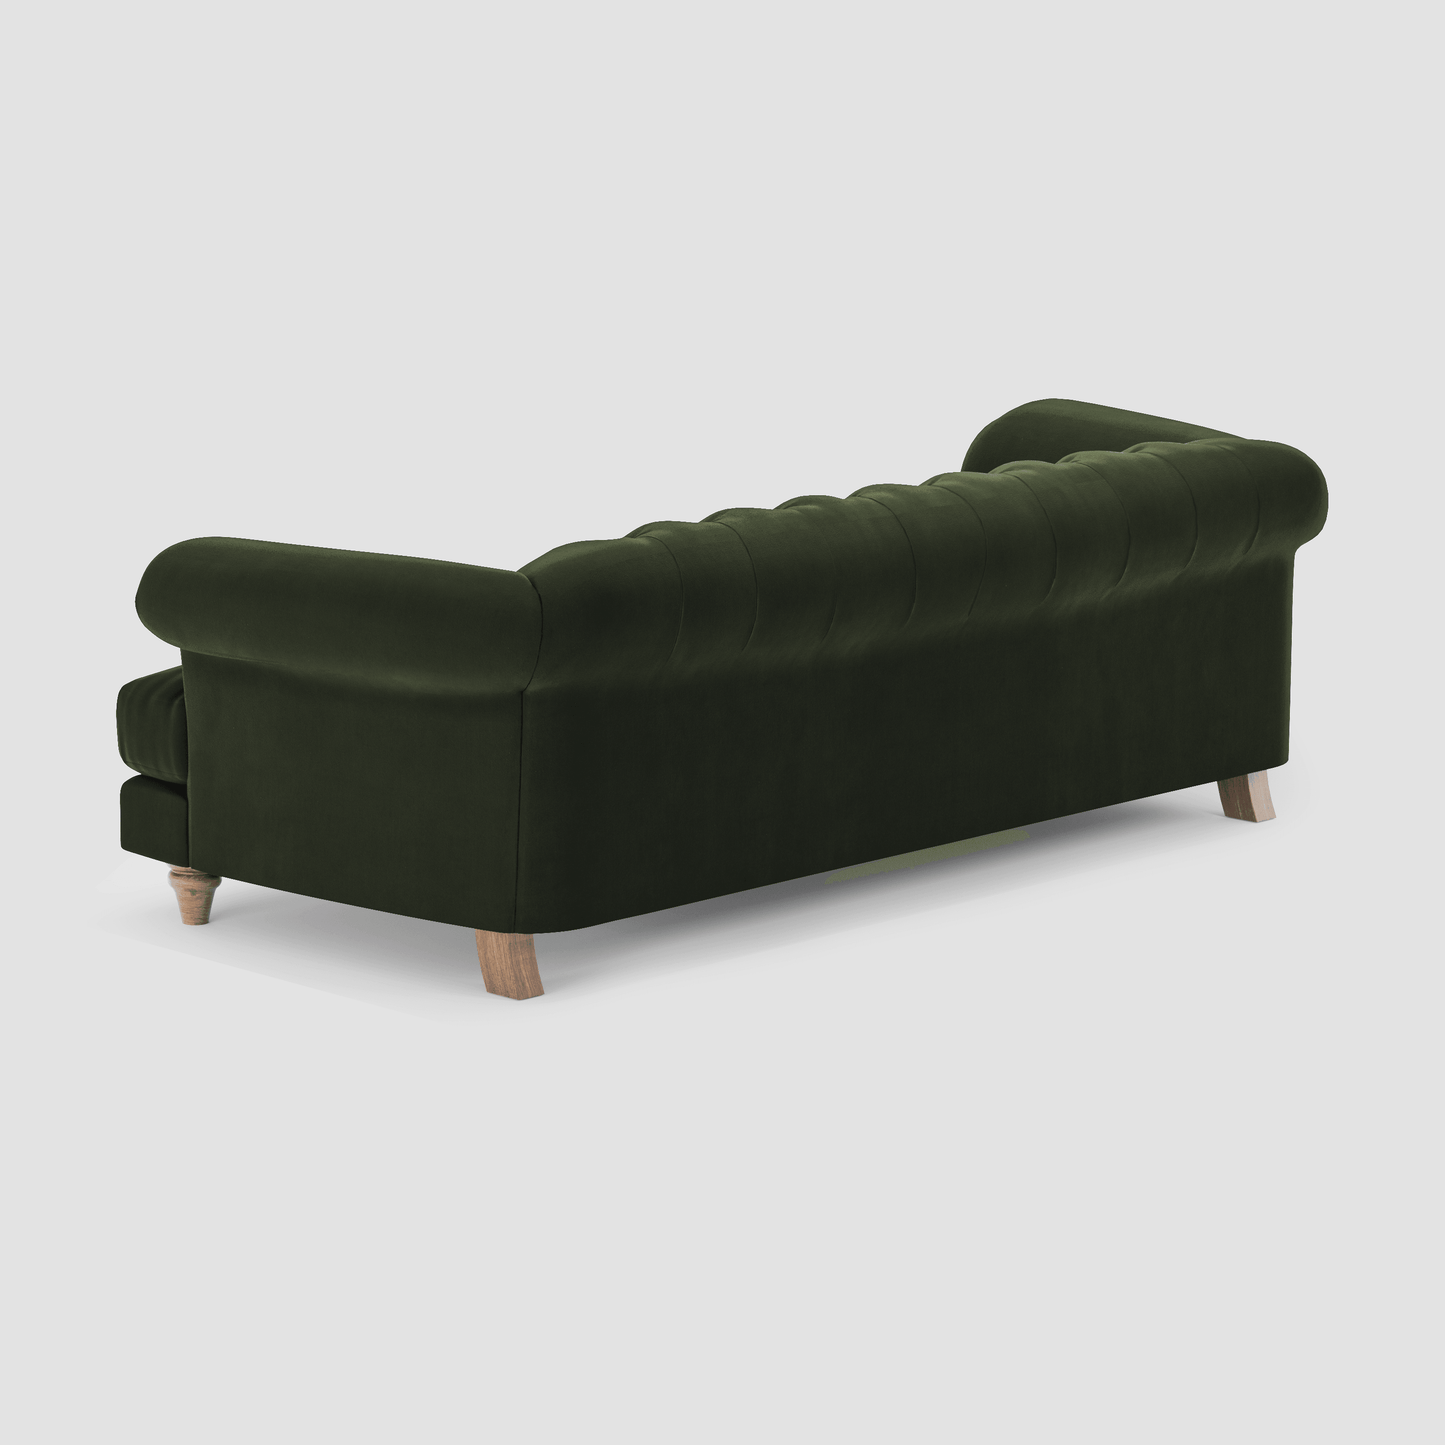 Aggy Three Seater Sofa - Flown the Coop